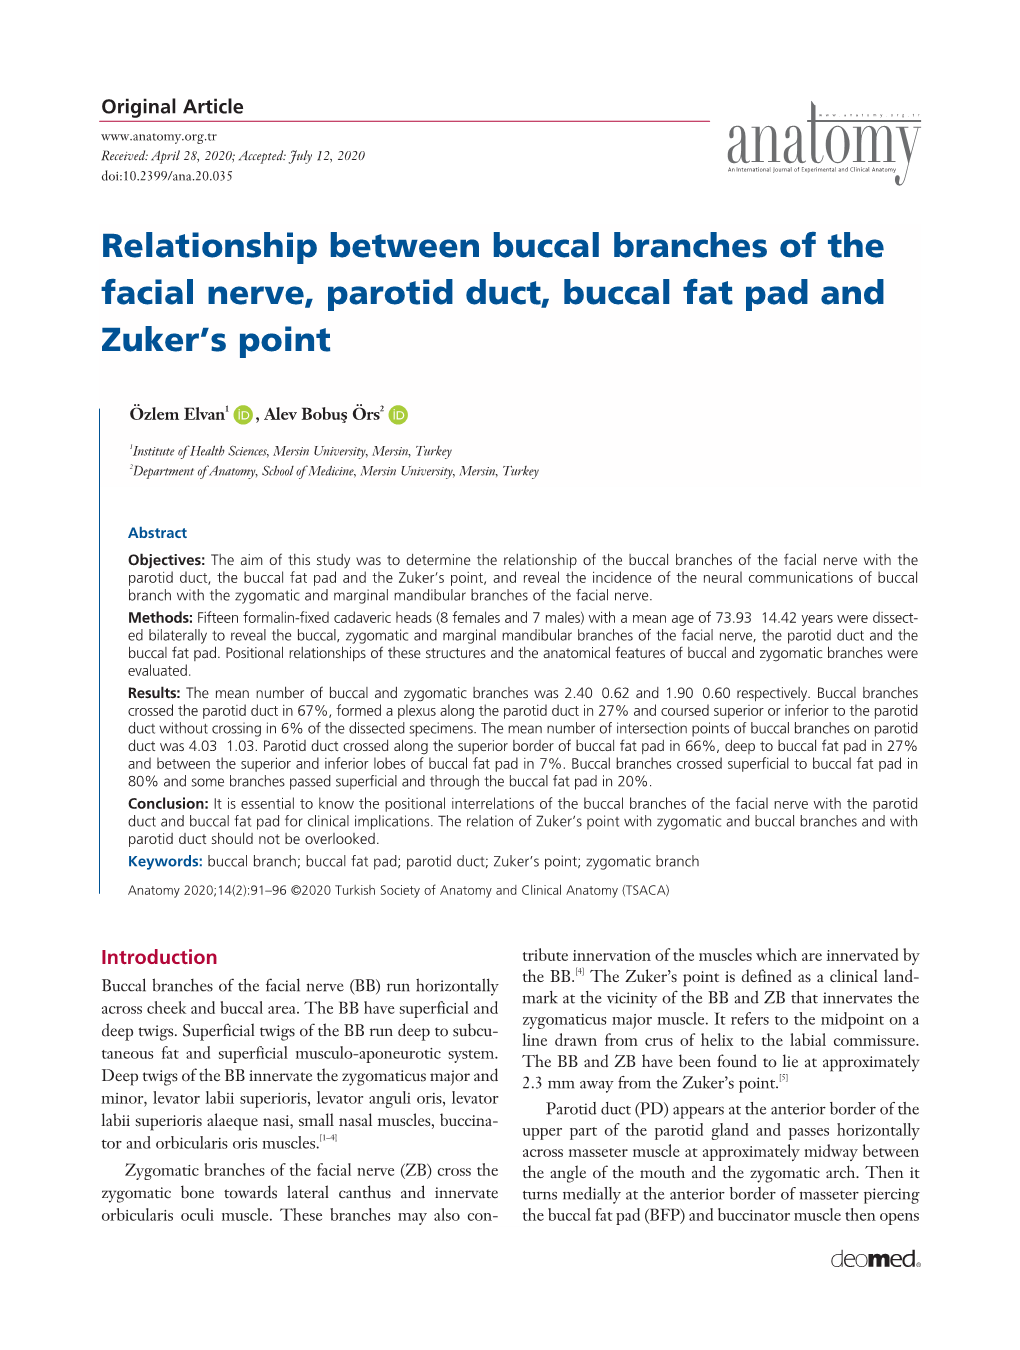 Relationship Between Buccal Branches of the Facial Nerve, Parotid Duct, Buccal Fat Pad and Zuker’S Point